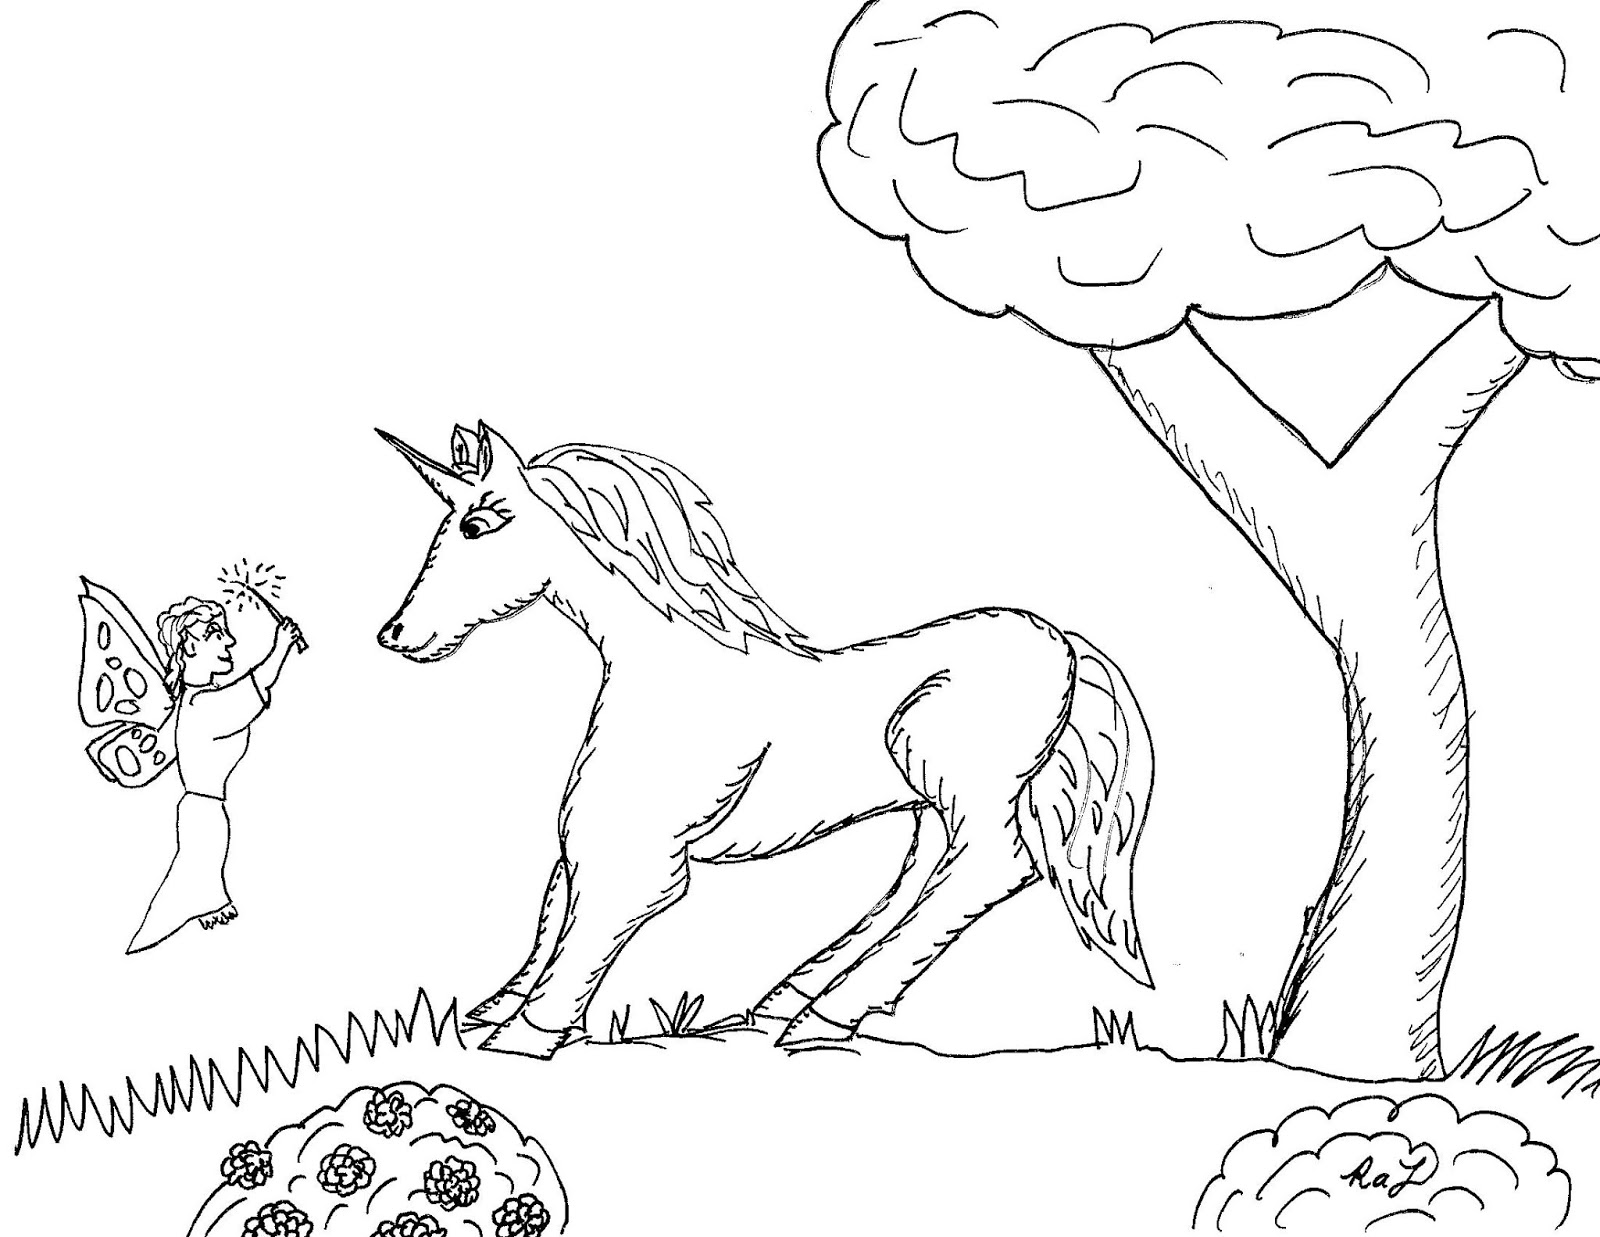 Coloring Pages : Robin Great Coloring Unicorns And Fairies Are ...